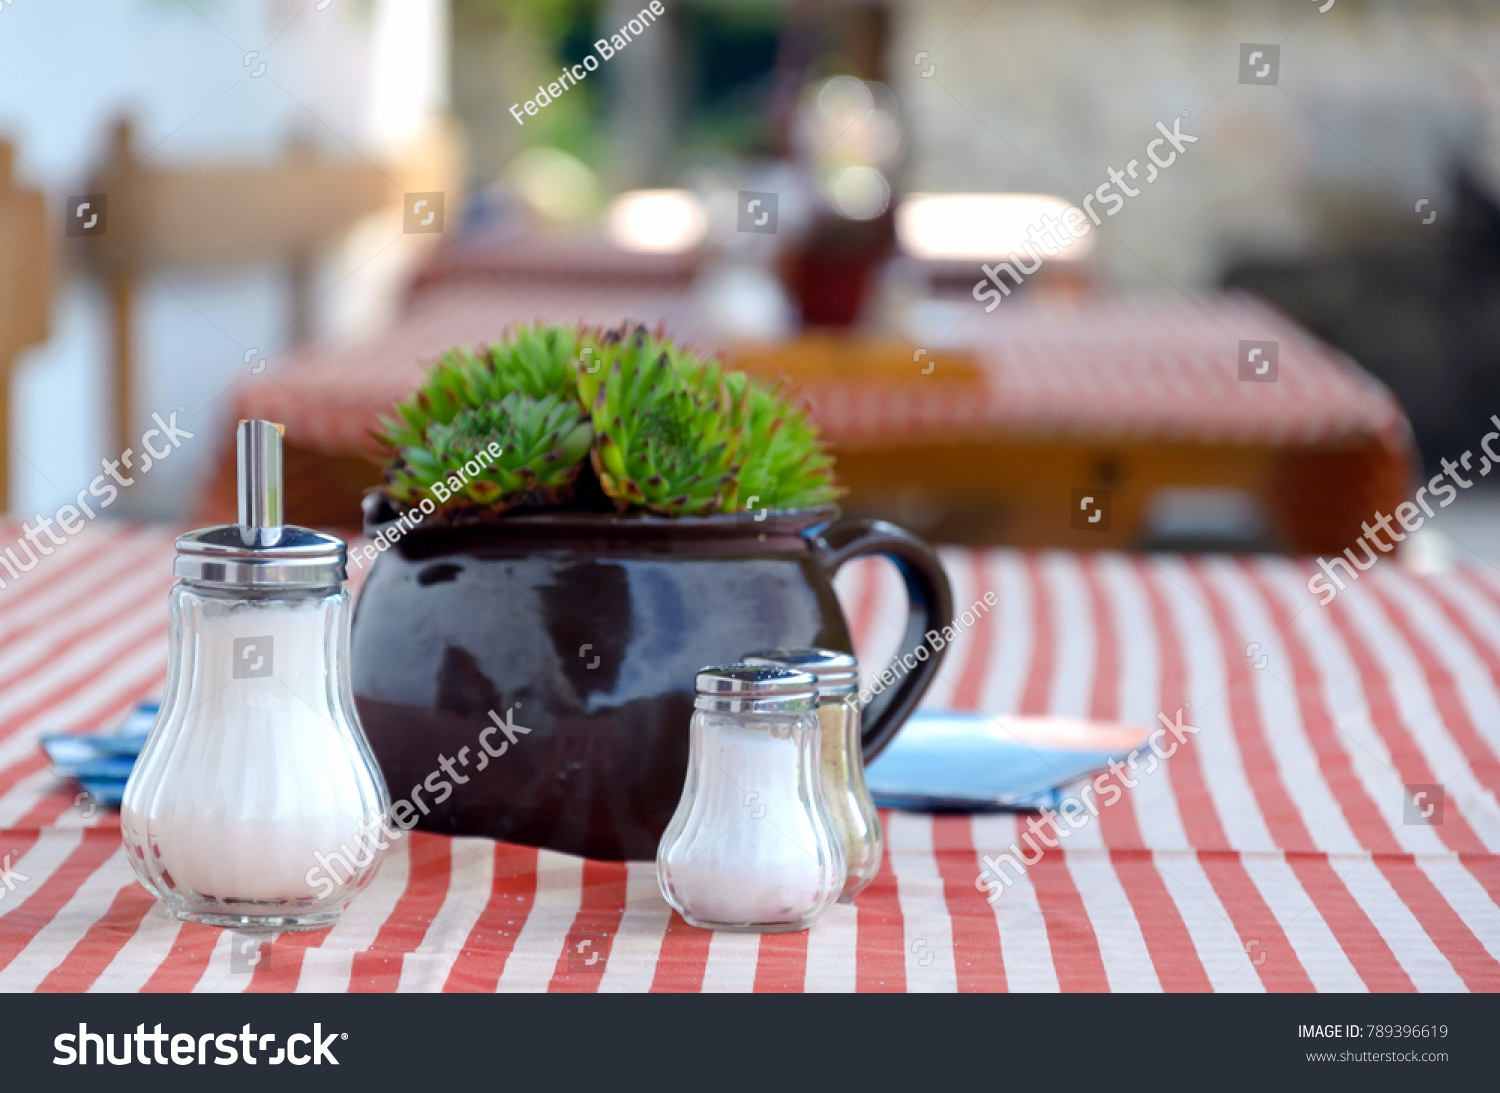 stock-photo-close-up-of-a-table-in-the-g